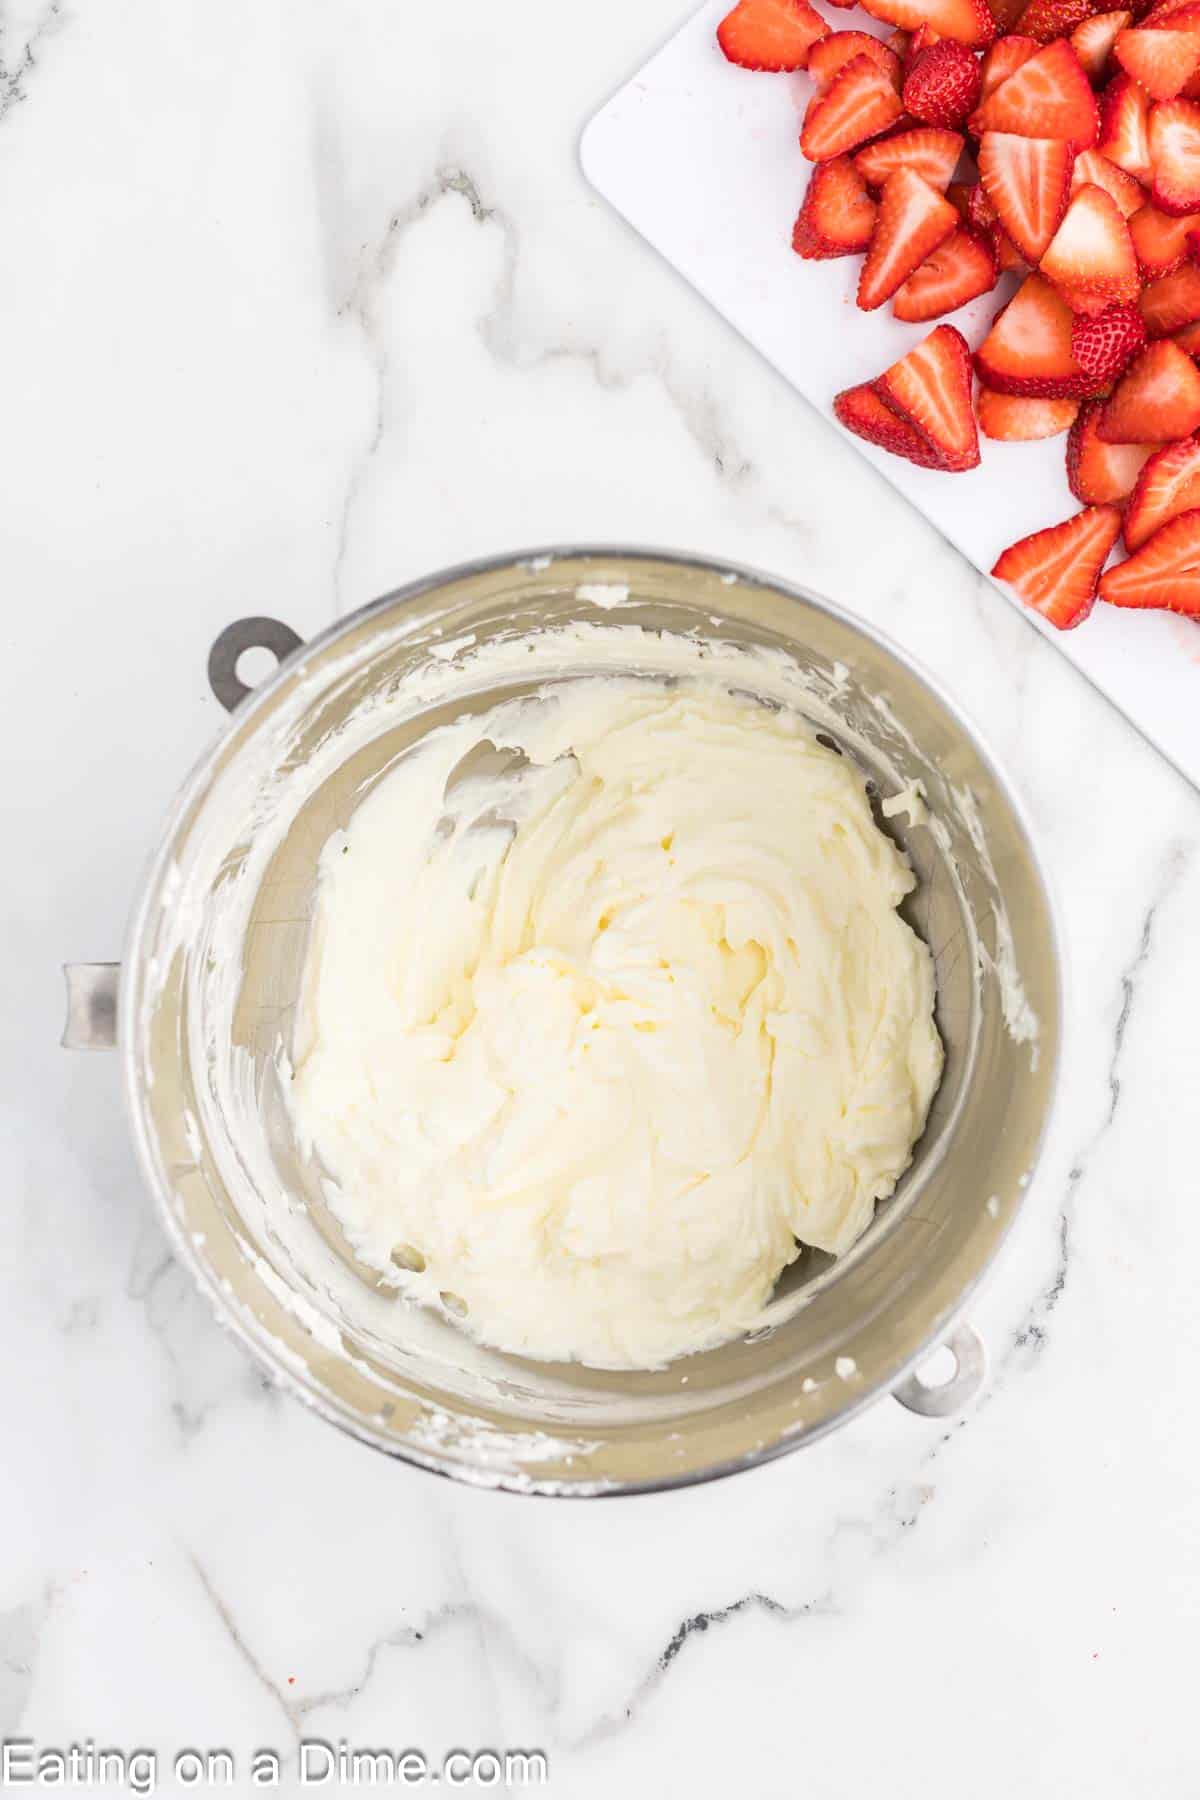 A mixing bowl filled with whipped cream sits on a white marble countertop. To the upper right, there is a cutting board with sliced strawberries, perfect for your strawberry crunch bars recipe. The background is clean and bright.